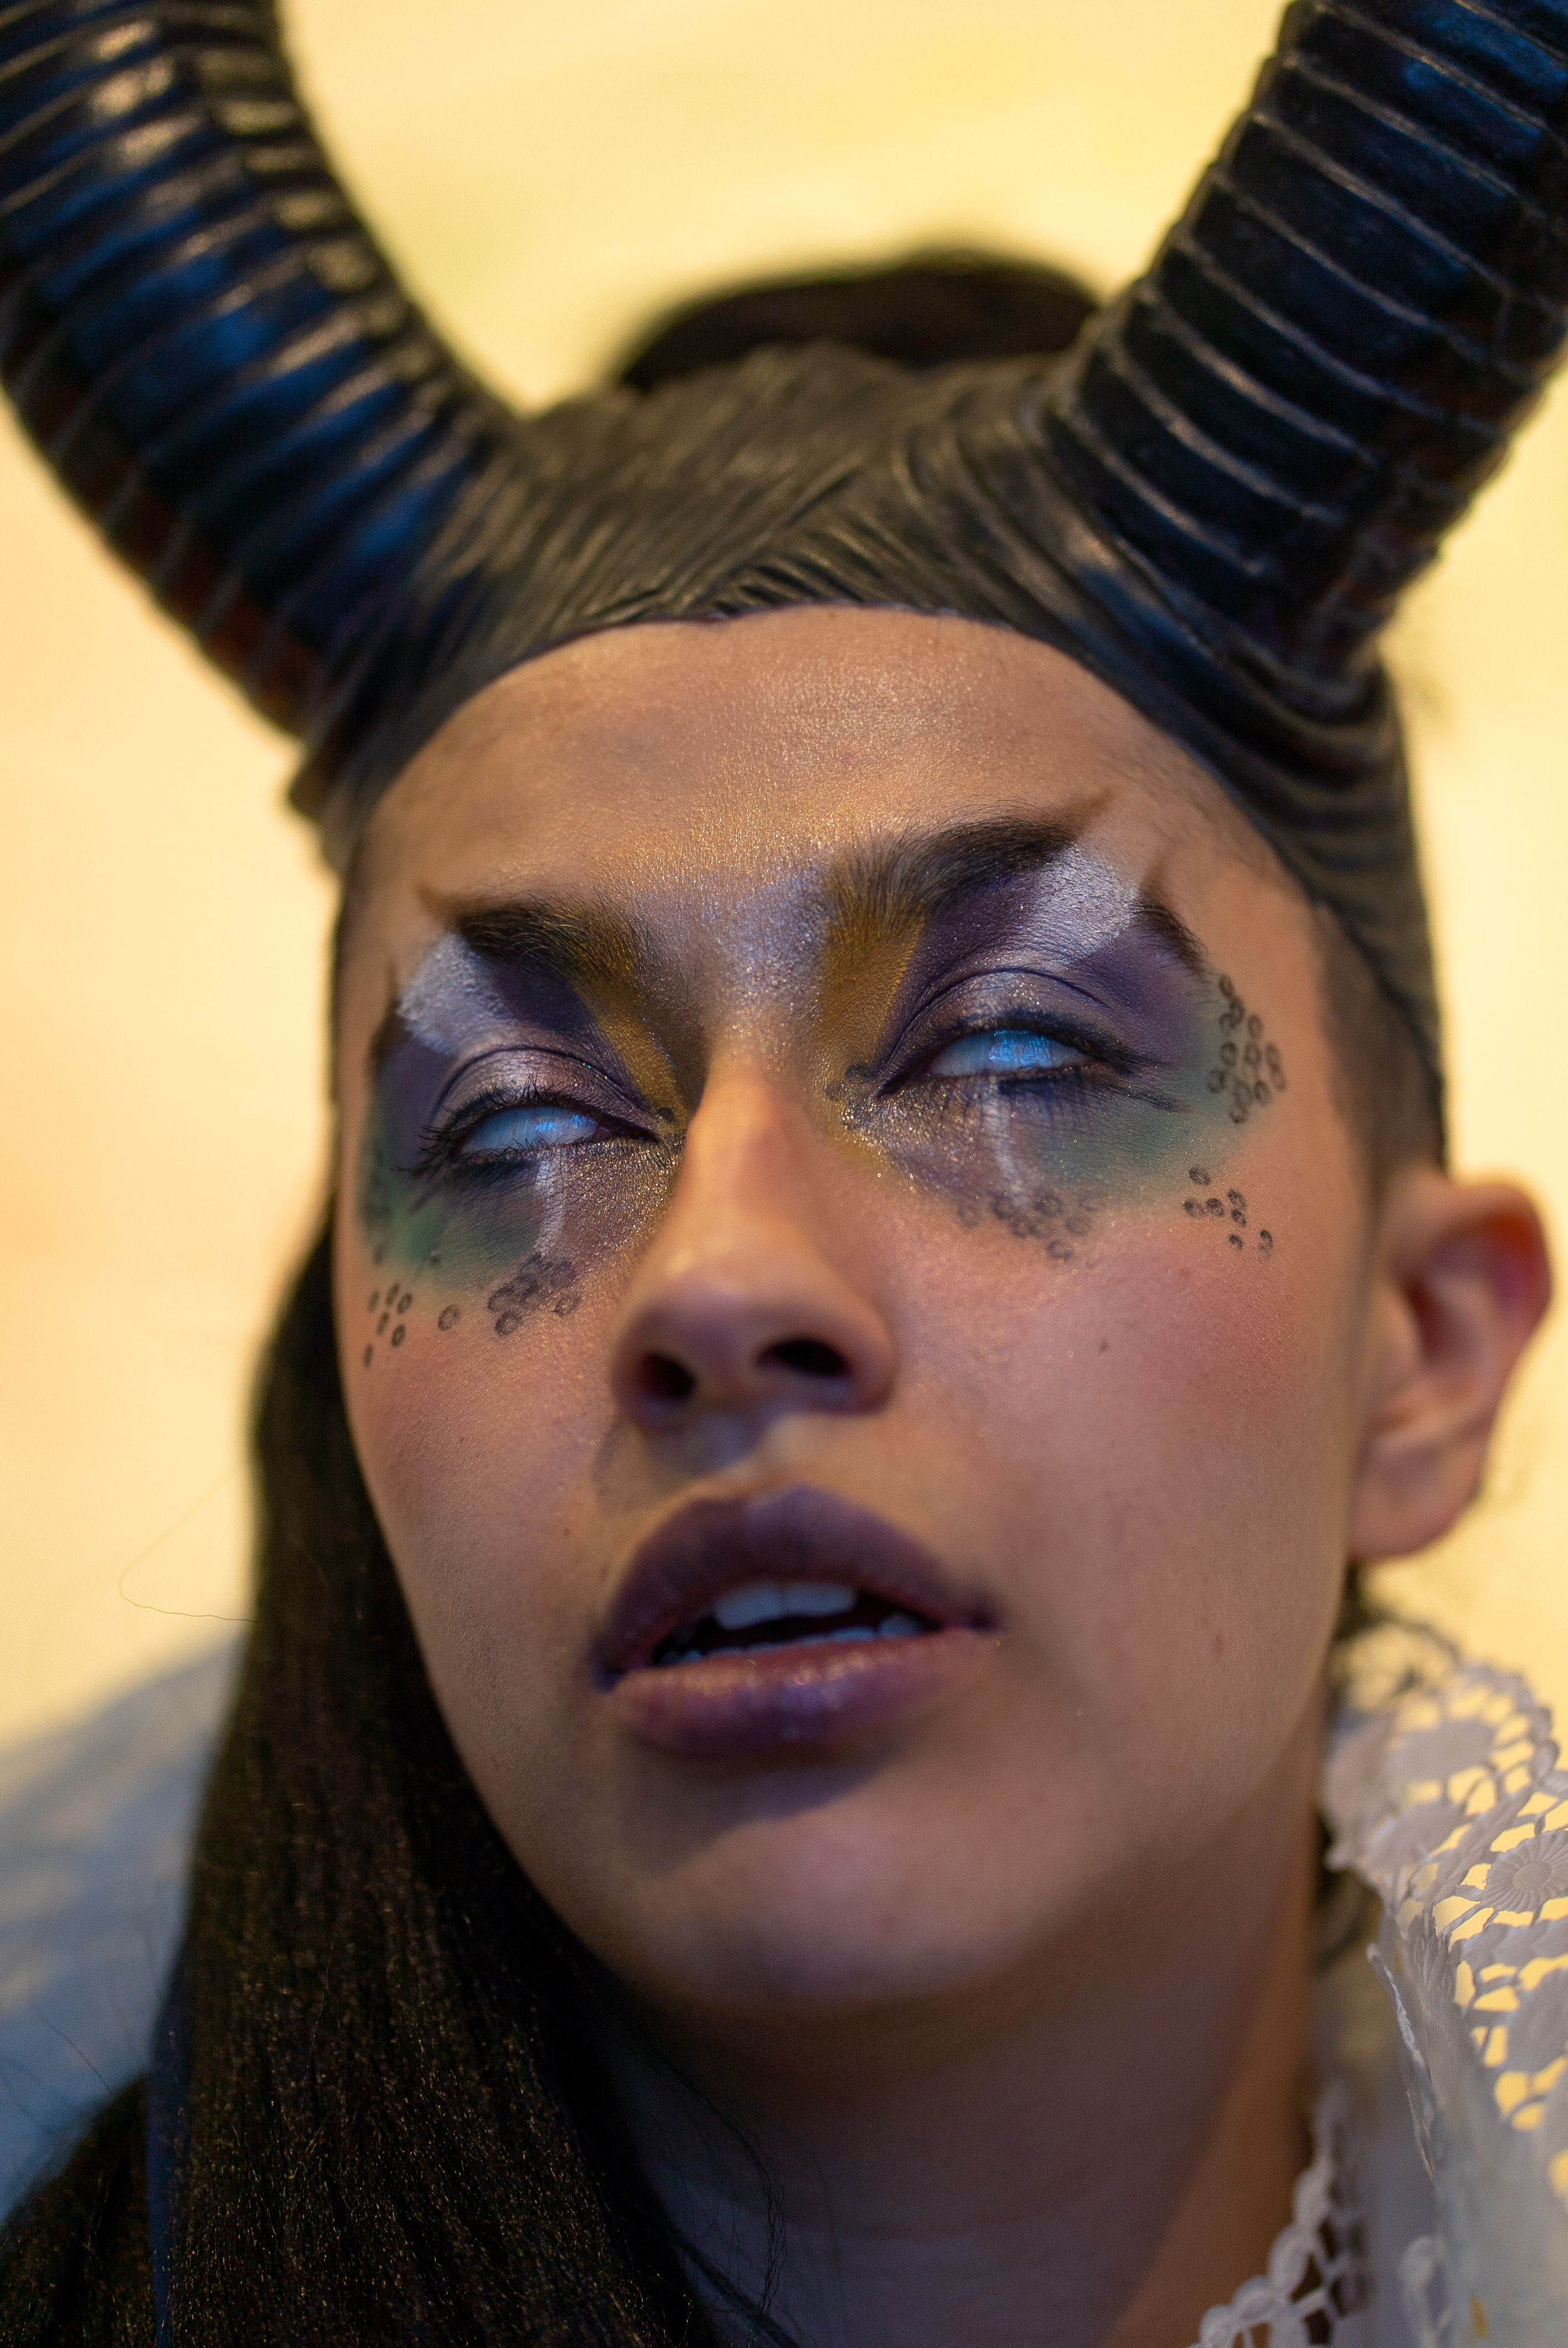 The photo is a close-up of a person with two plastic horns as headgear and imaginative eye make-up in purple, green, white and black with glitter. They have opened their mouth slightly. Their eyeballs are turned upwards and slightly opened, so that only the white of the eye is visible.